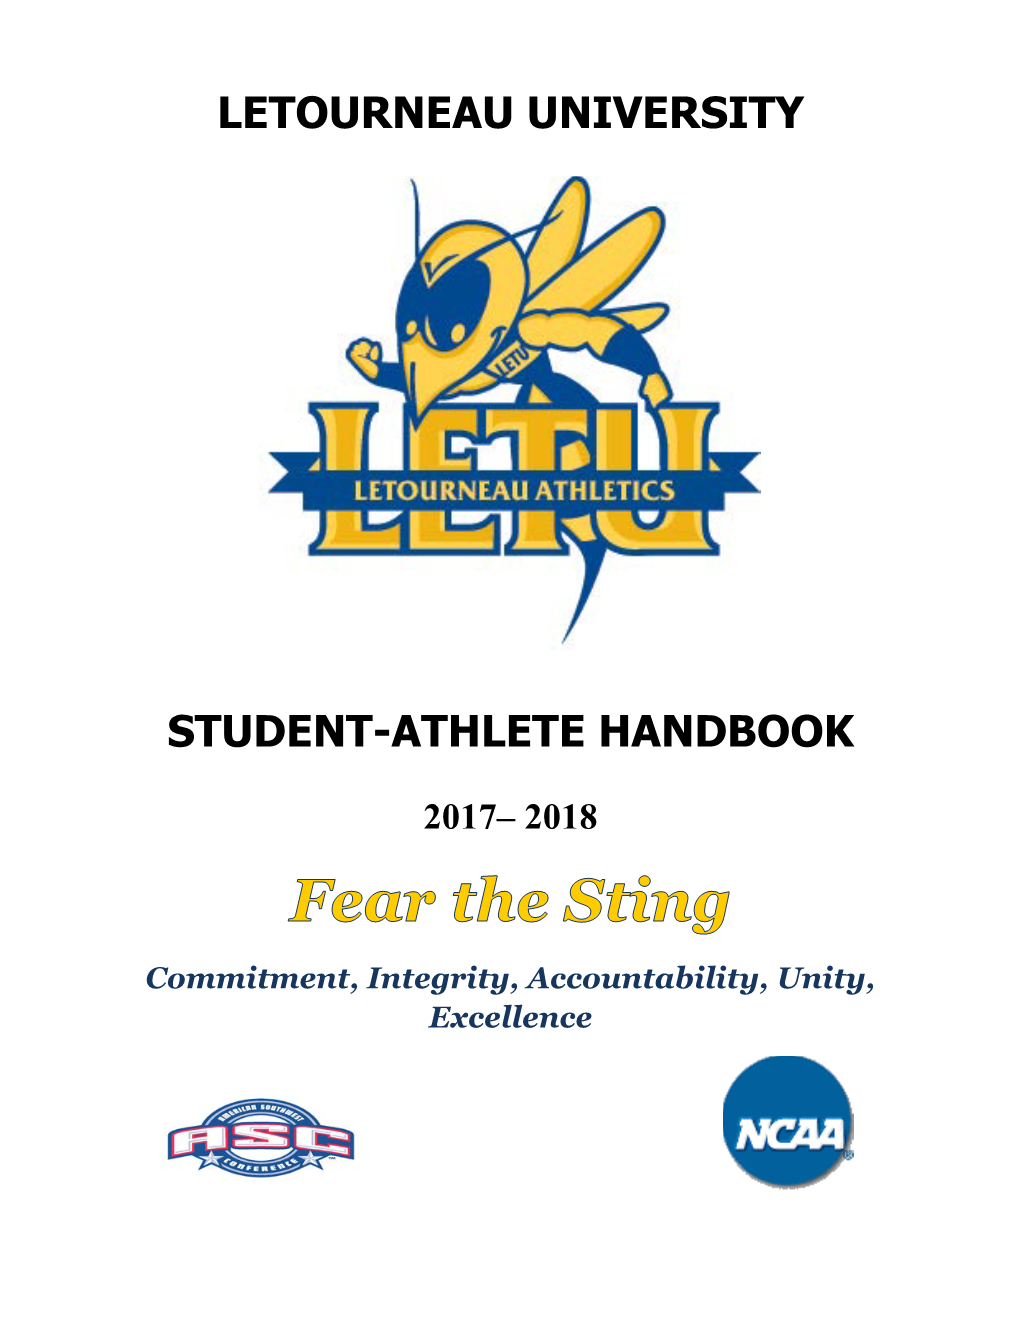 Letourneau University Student-Athlete Handbook and Have Been Given the Opportunity to Ask Questions About All Information and Policies in the Handbook